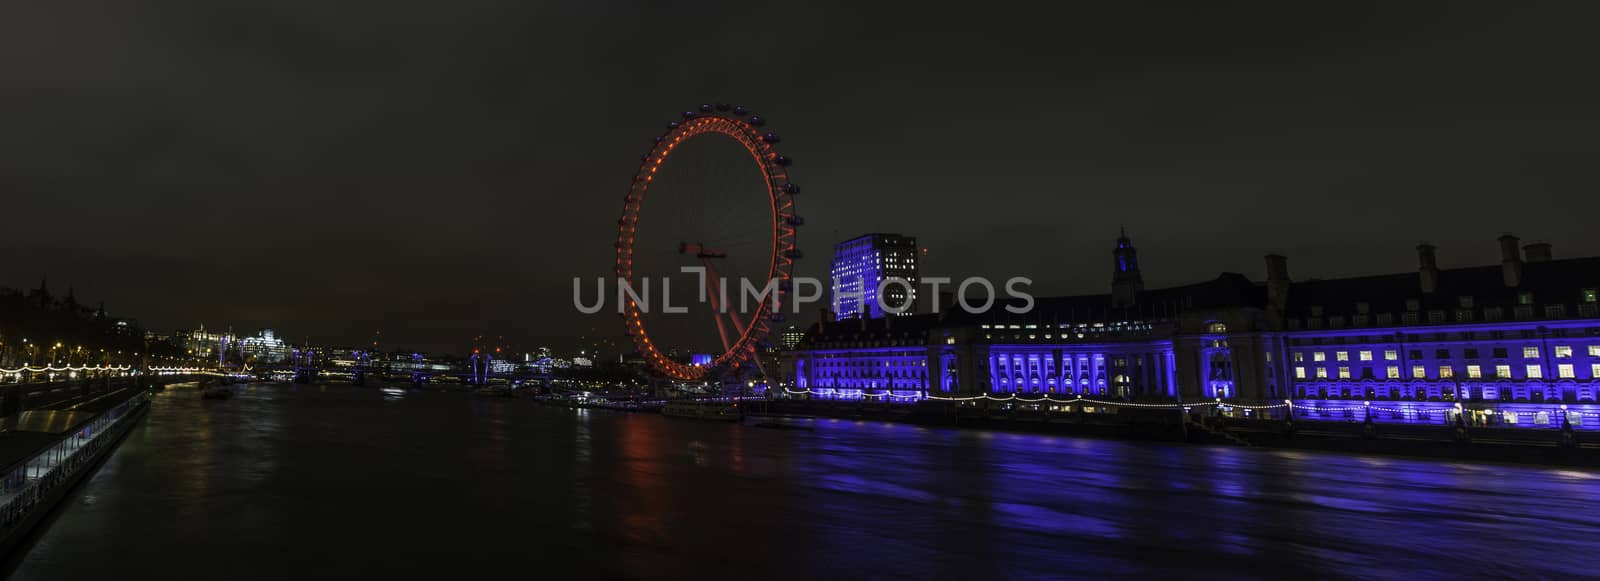 The Eye in the night by Christophe_Merceron